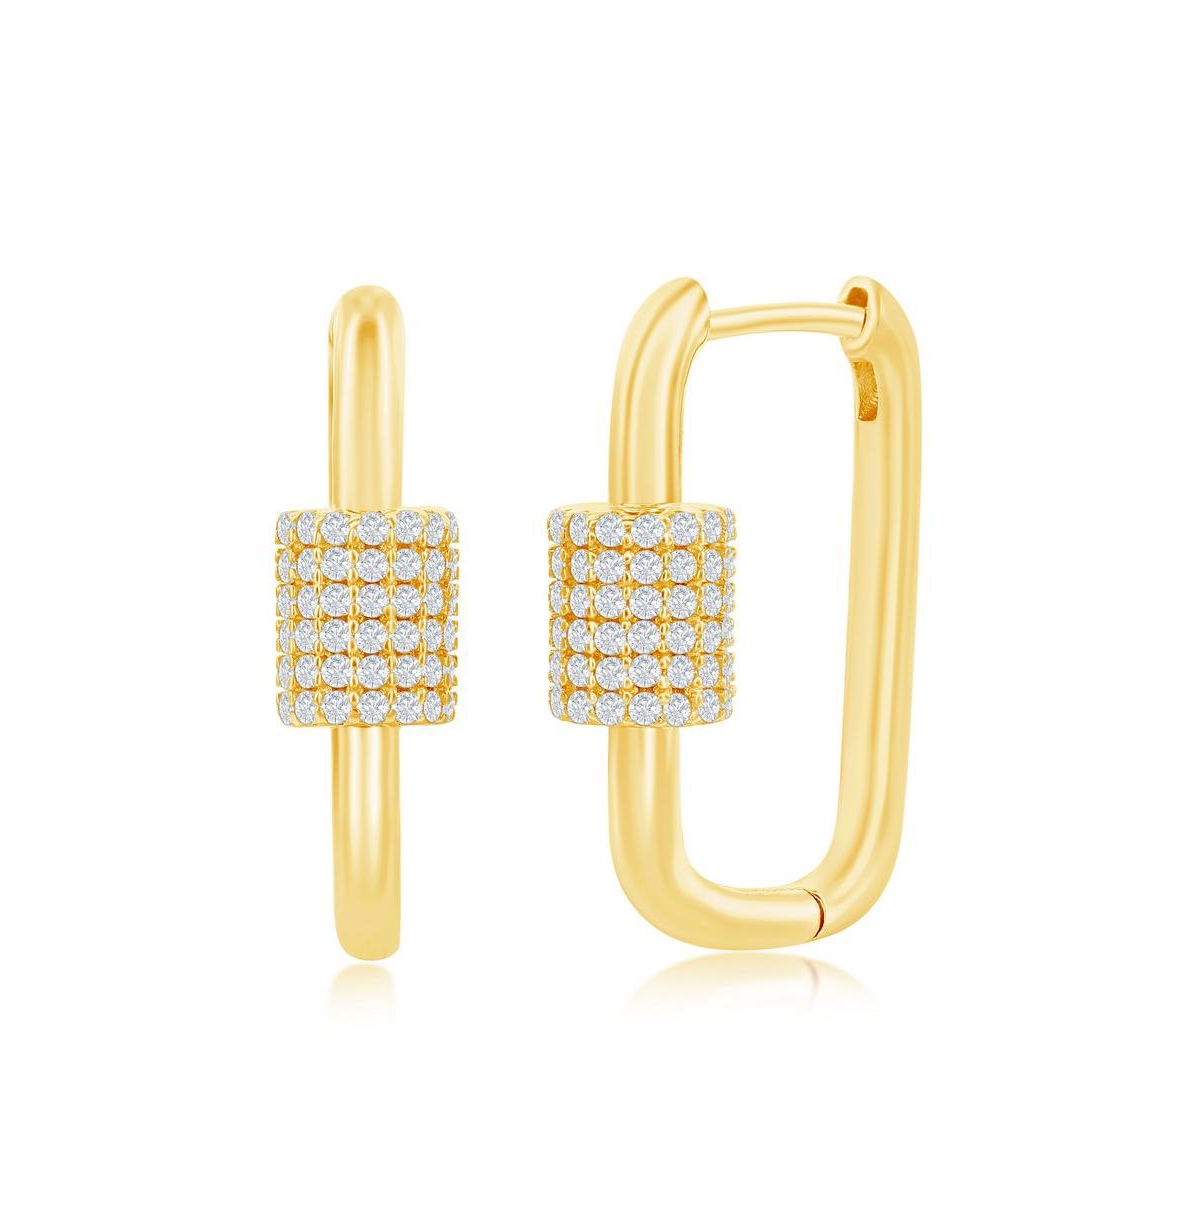 Sterling Silver or Gold Plated Over Sterling Silver Cz Oval Carabiner Paperclip Earrings - Gold